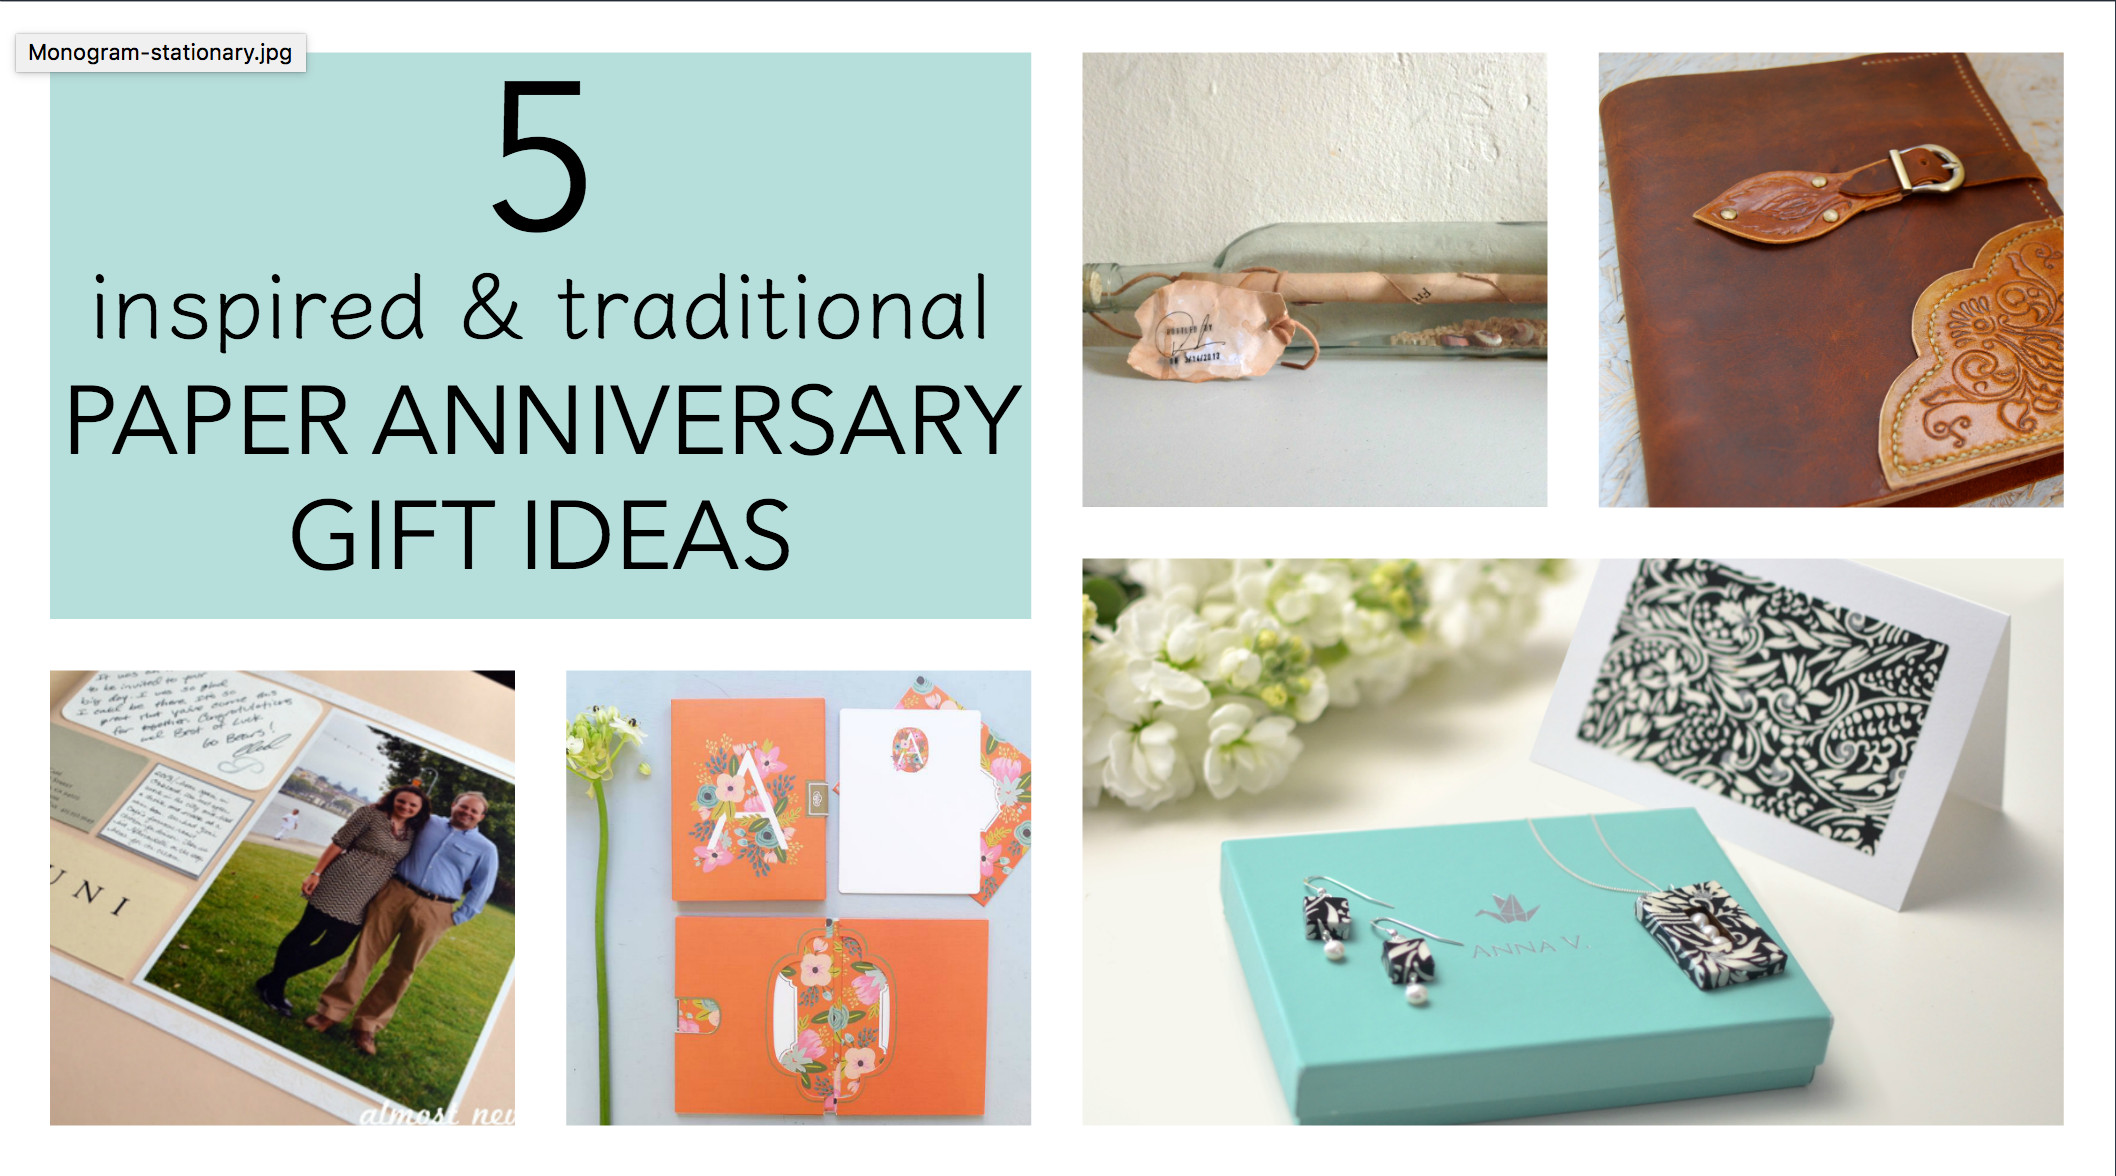 3 Year Anniversary Gift Ideas For Husband
 Download e Year Anniversary Gift Ideas